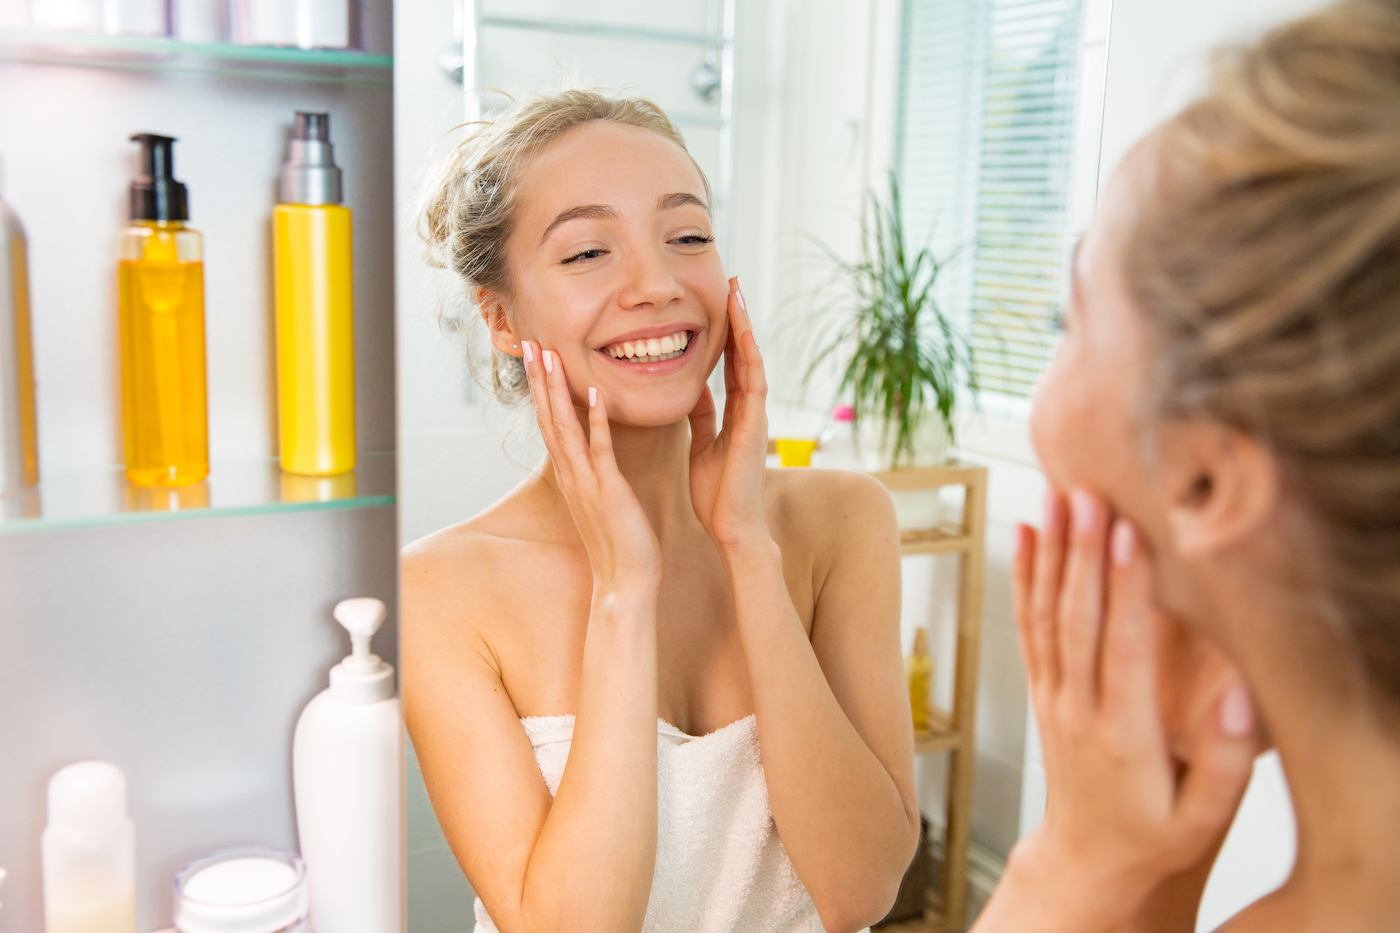 How To Get Clear, Healthy Skin With Natural Products: Livegreen Face Wash And Scrub May Be The Answer